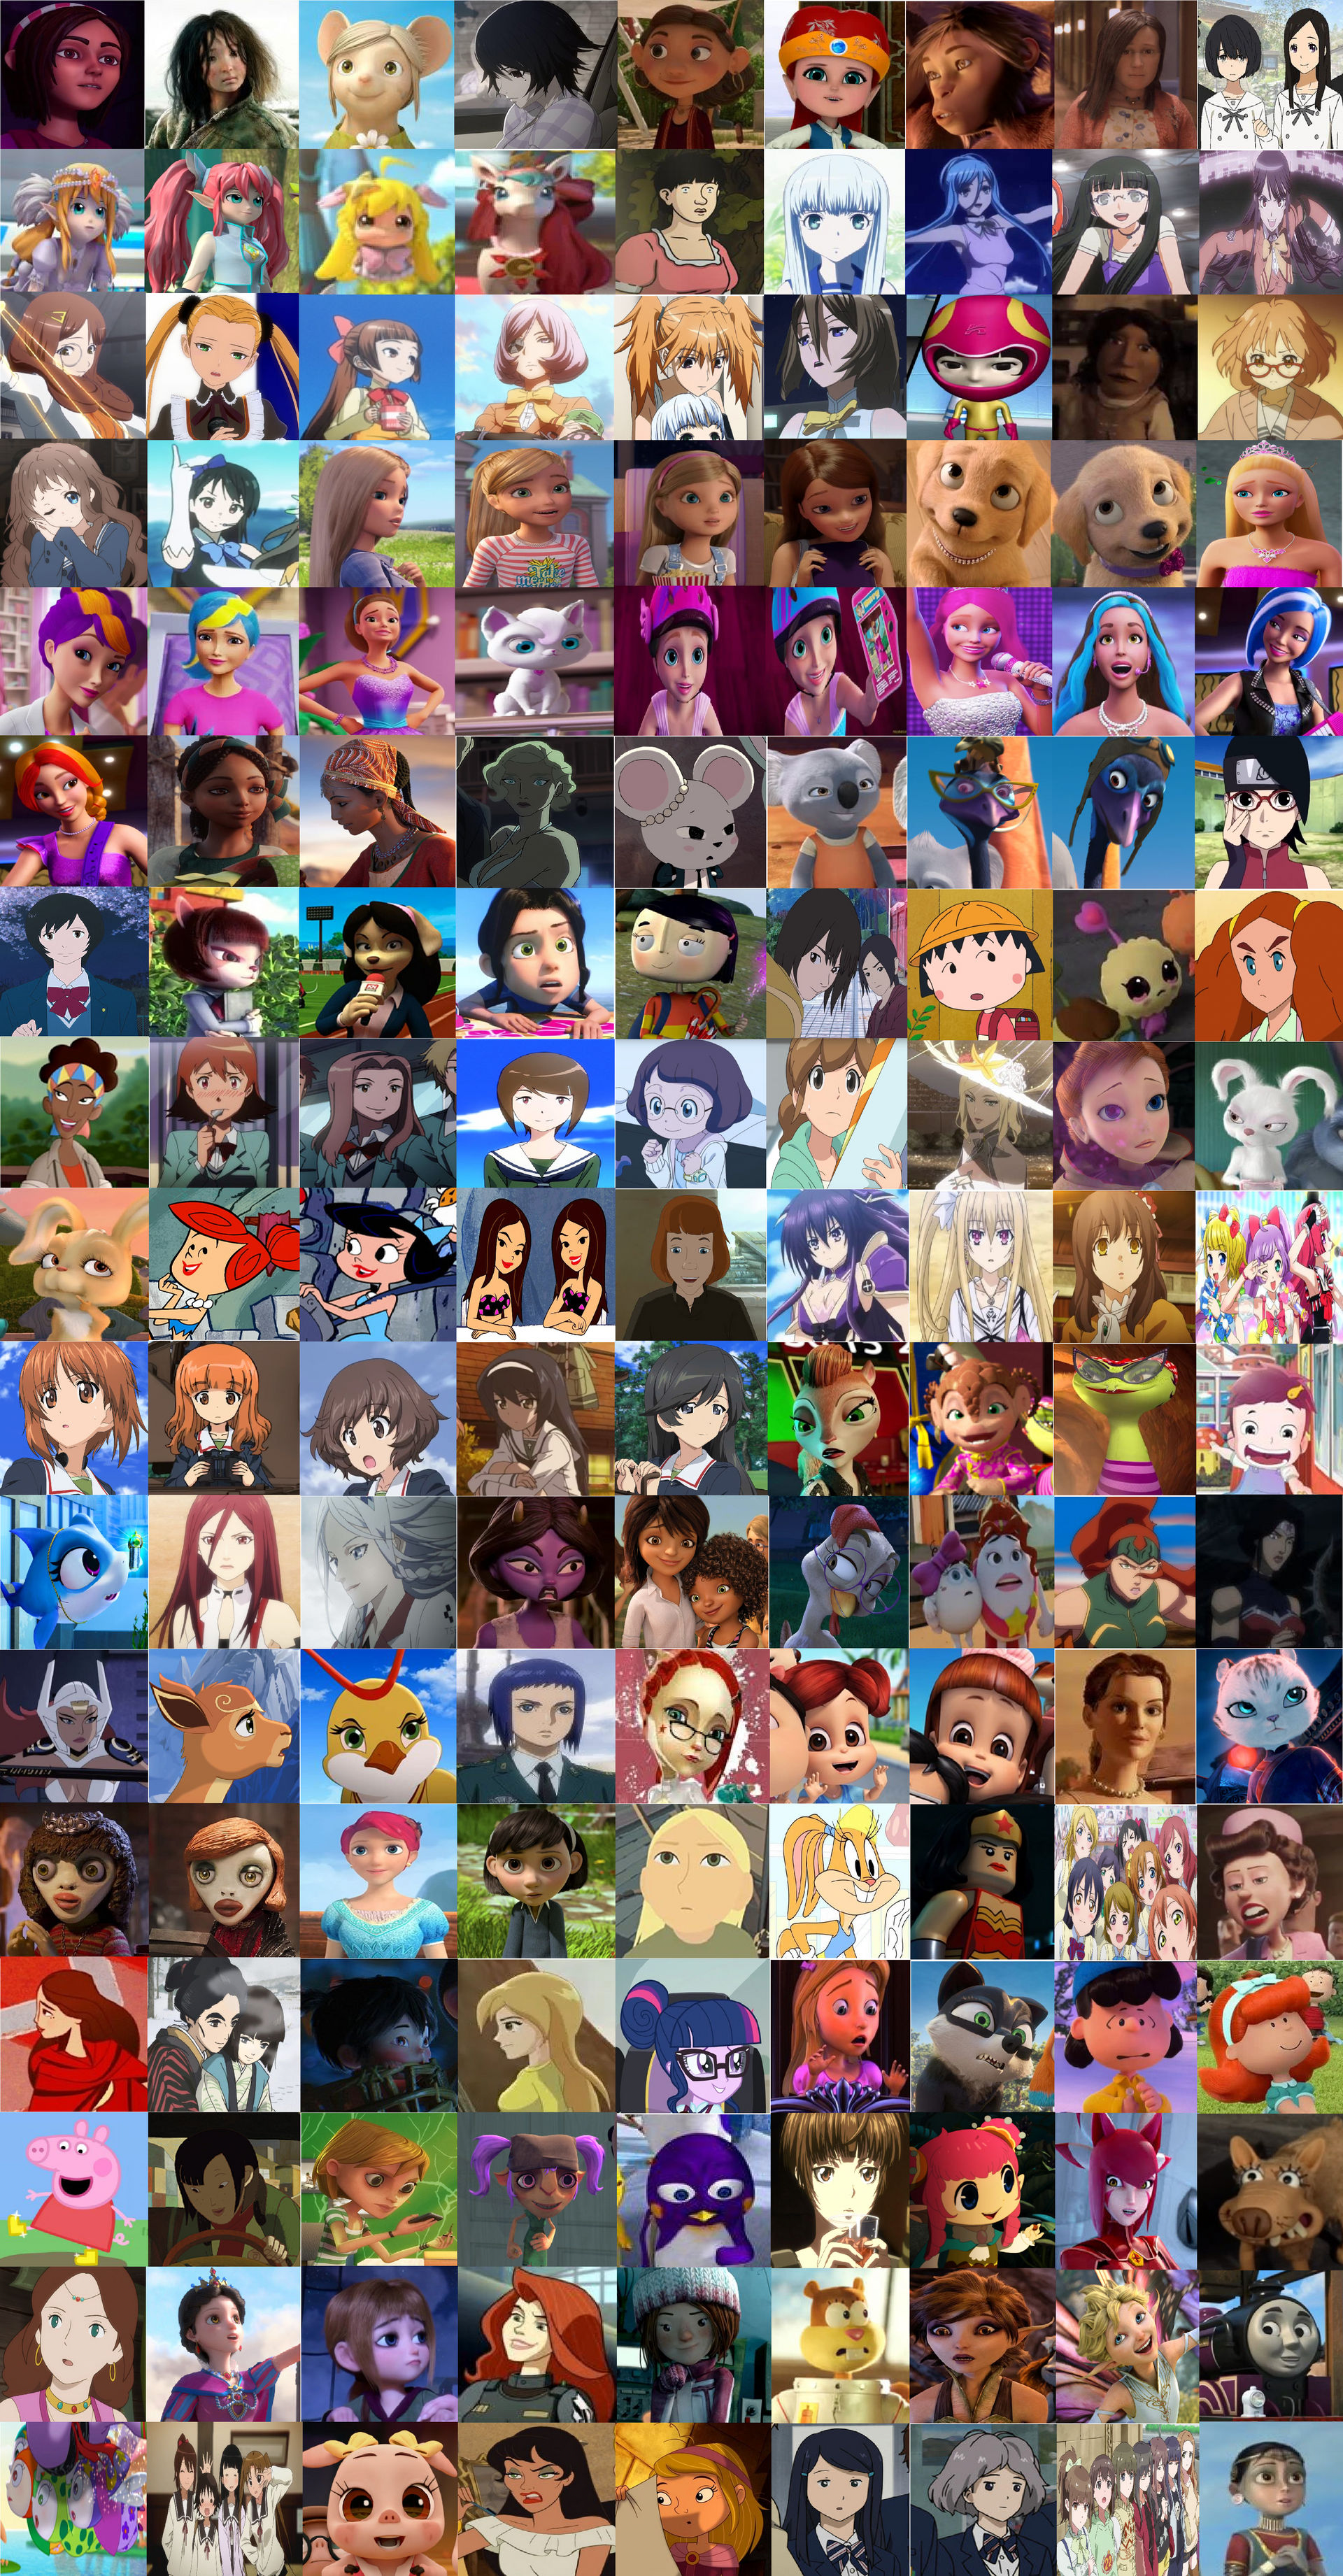 Animated Heroines 15 by Blossomgutz on DeviantArt